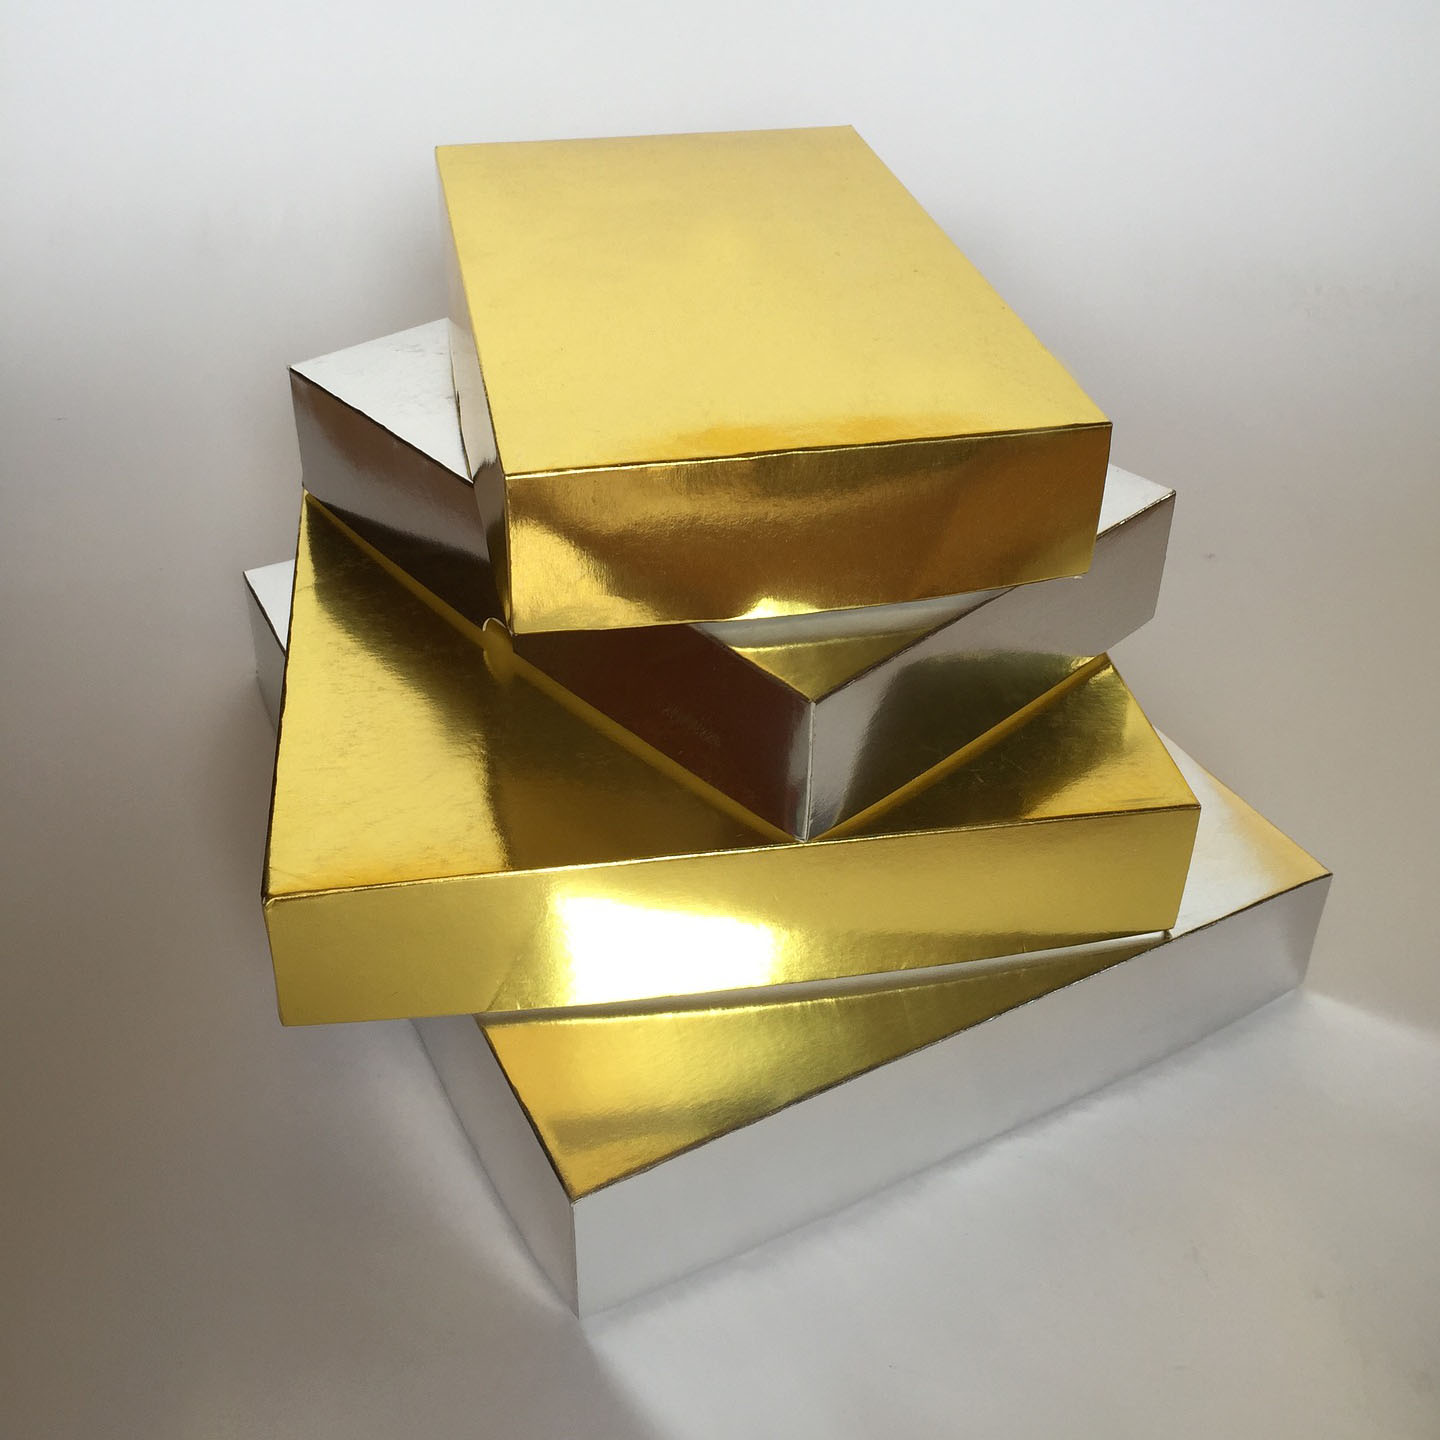 Metallic Gold & Metallic Silver Cardboard Packaging Boxes From Thailand